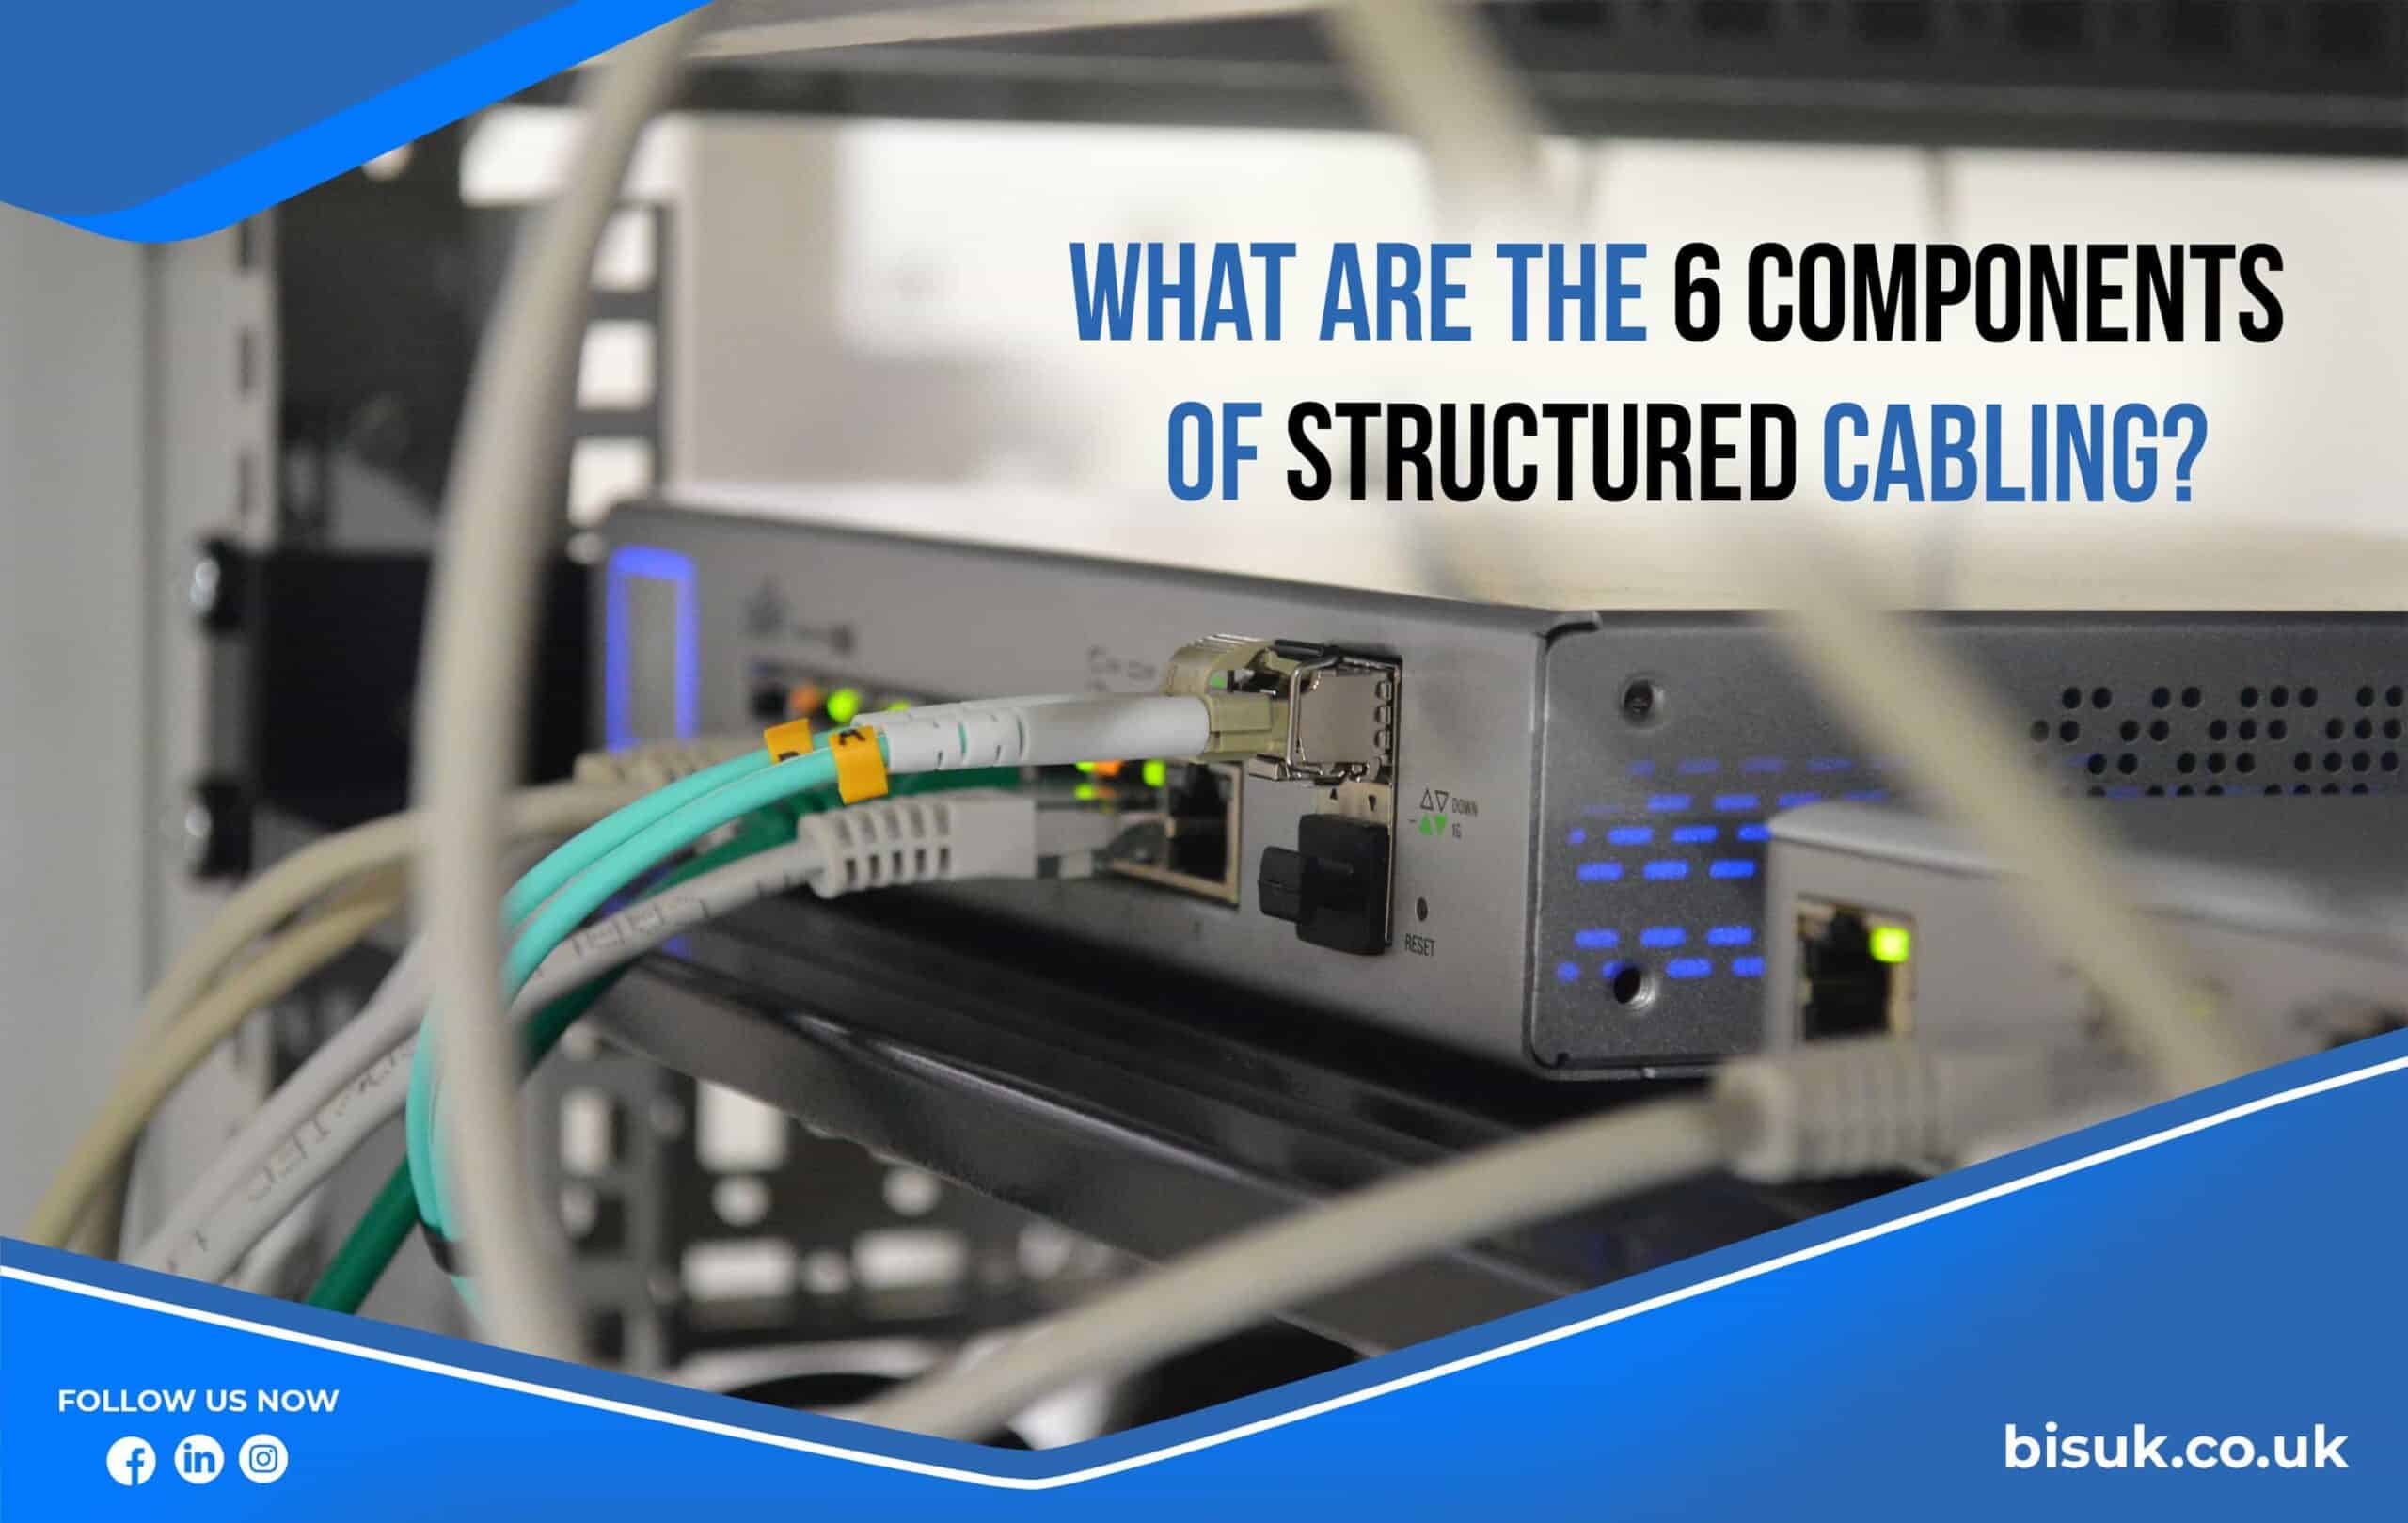 6 components of structured cabling